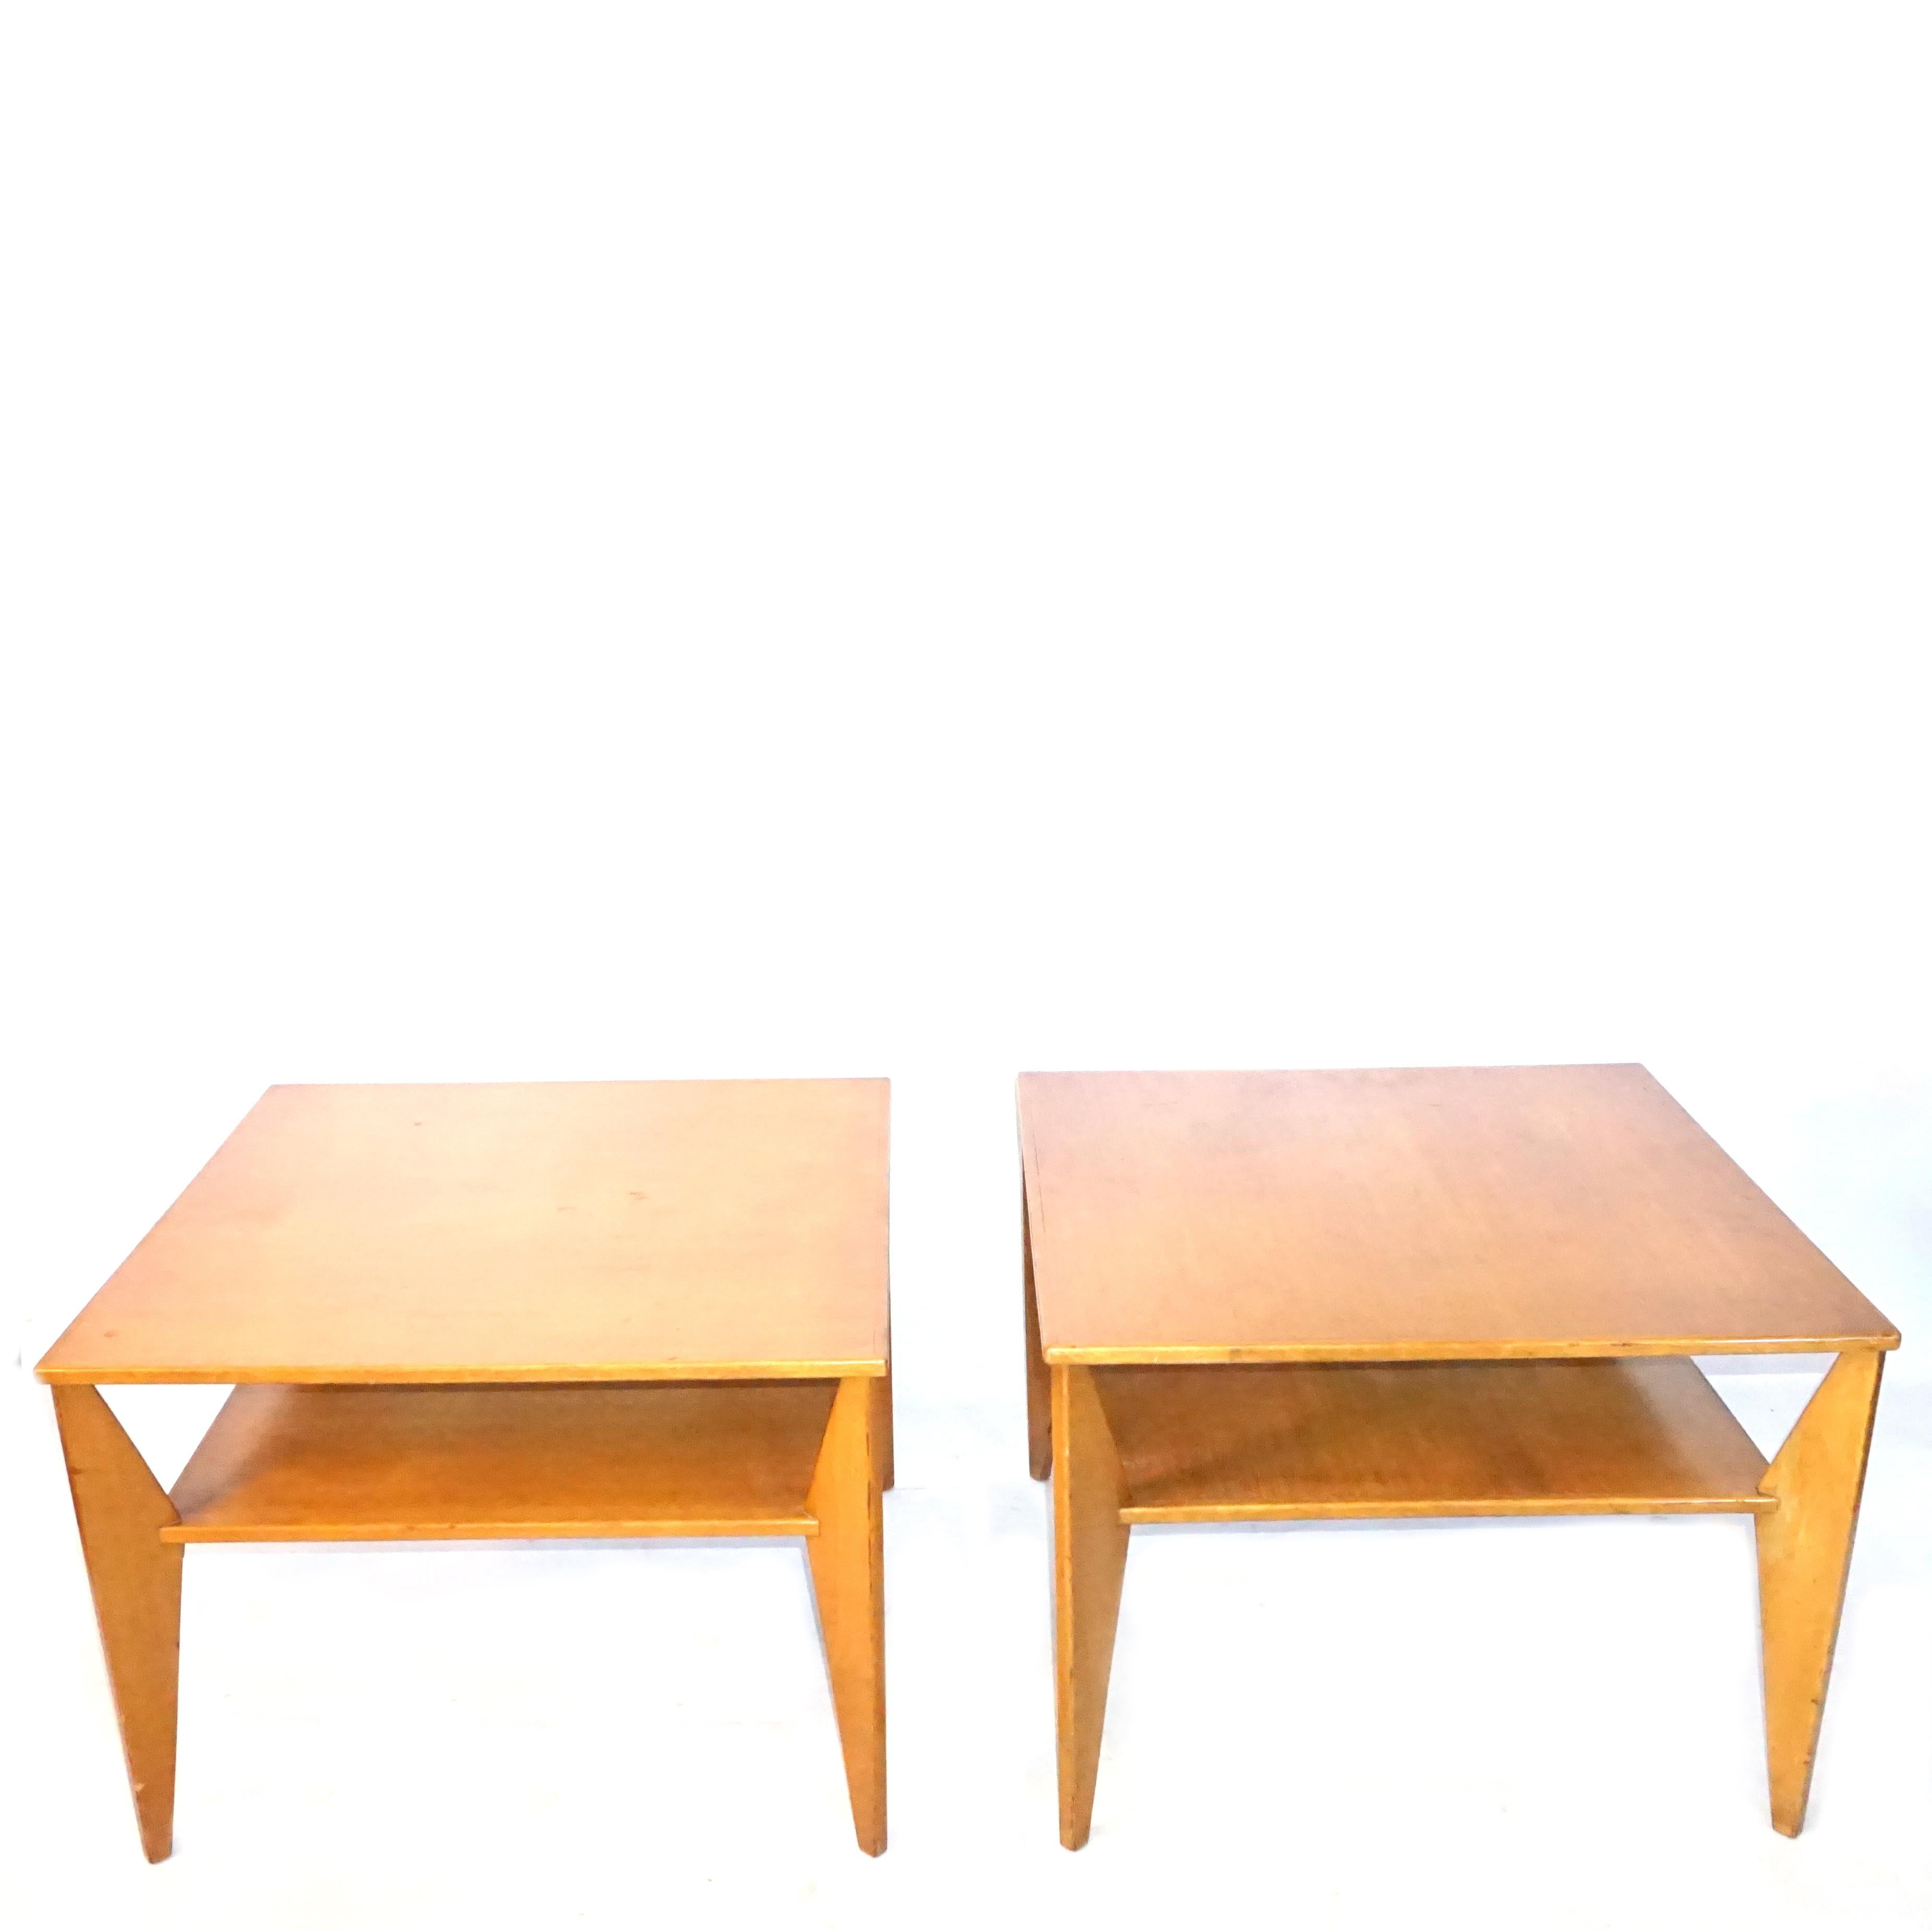 A vintage Mid-Century modern Swedish pair of side, end tables made of hand crafted polished, partly veneered Walnut in good condition. The Scandinavian corner tables are composed with a shelf, chevron and standing on four formed legs. Wear